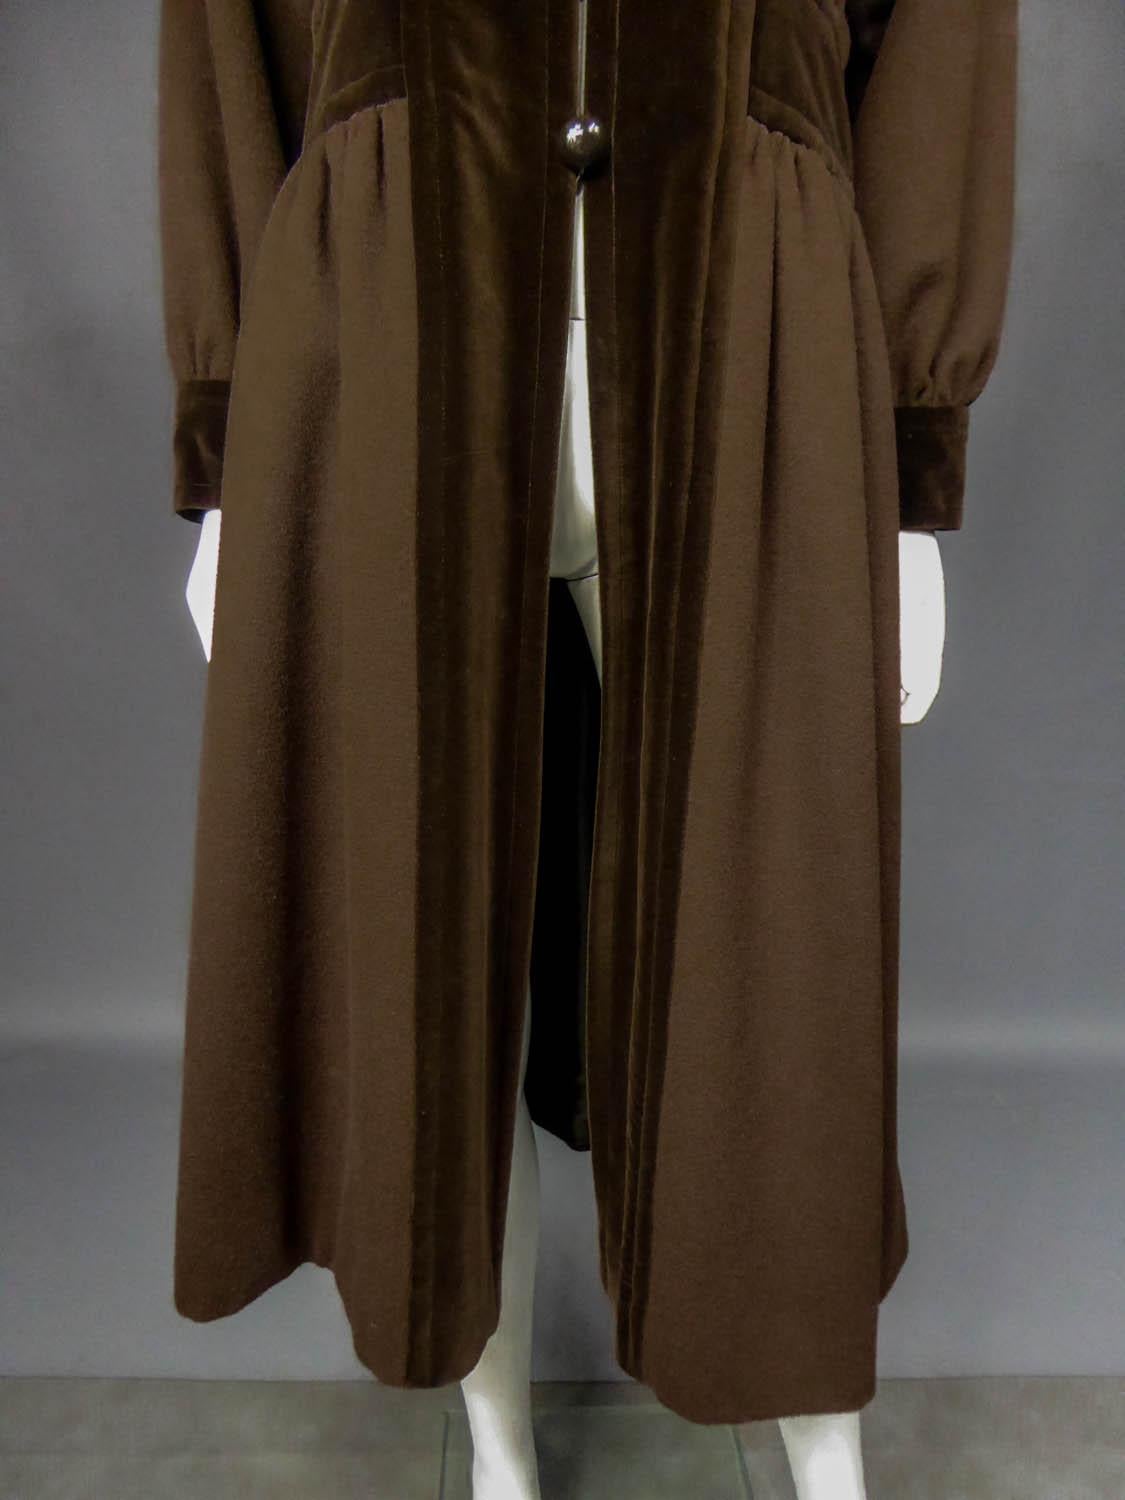 Circa 1976 – 1978
France

Saint Laurent Rive Gauche coat from the 1976 Ballets Russes collection by the famous couturier in his most creative period. Beautiful brown brushed mohair wool and chocolate velvet more sustained. Coat with placket, collar,